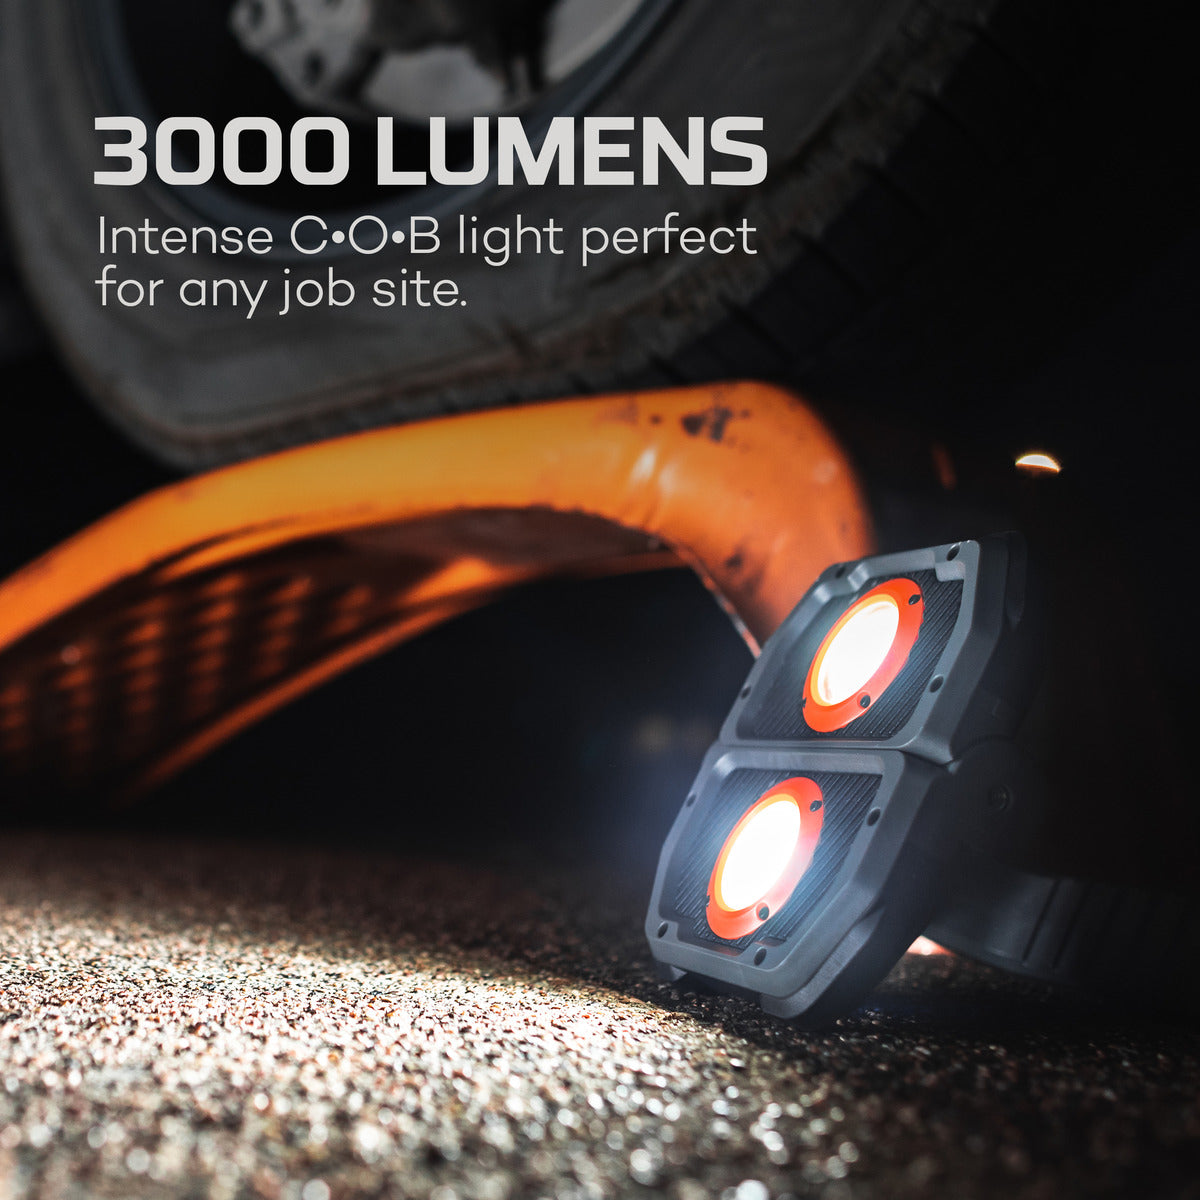 Omni 3000 Lumens Multi-Directional Rechargeable Work Light & Power Bank